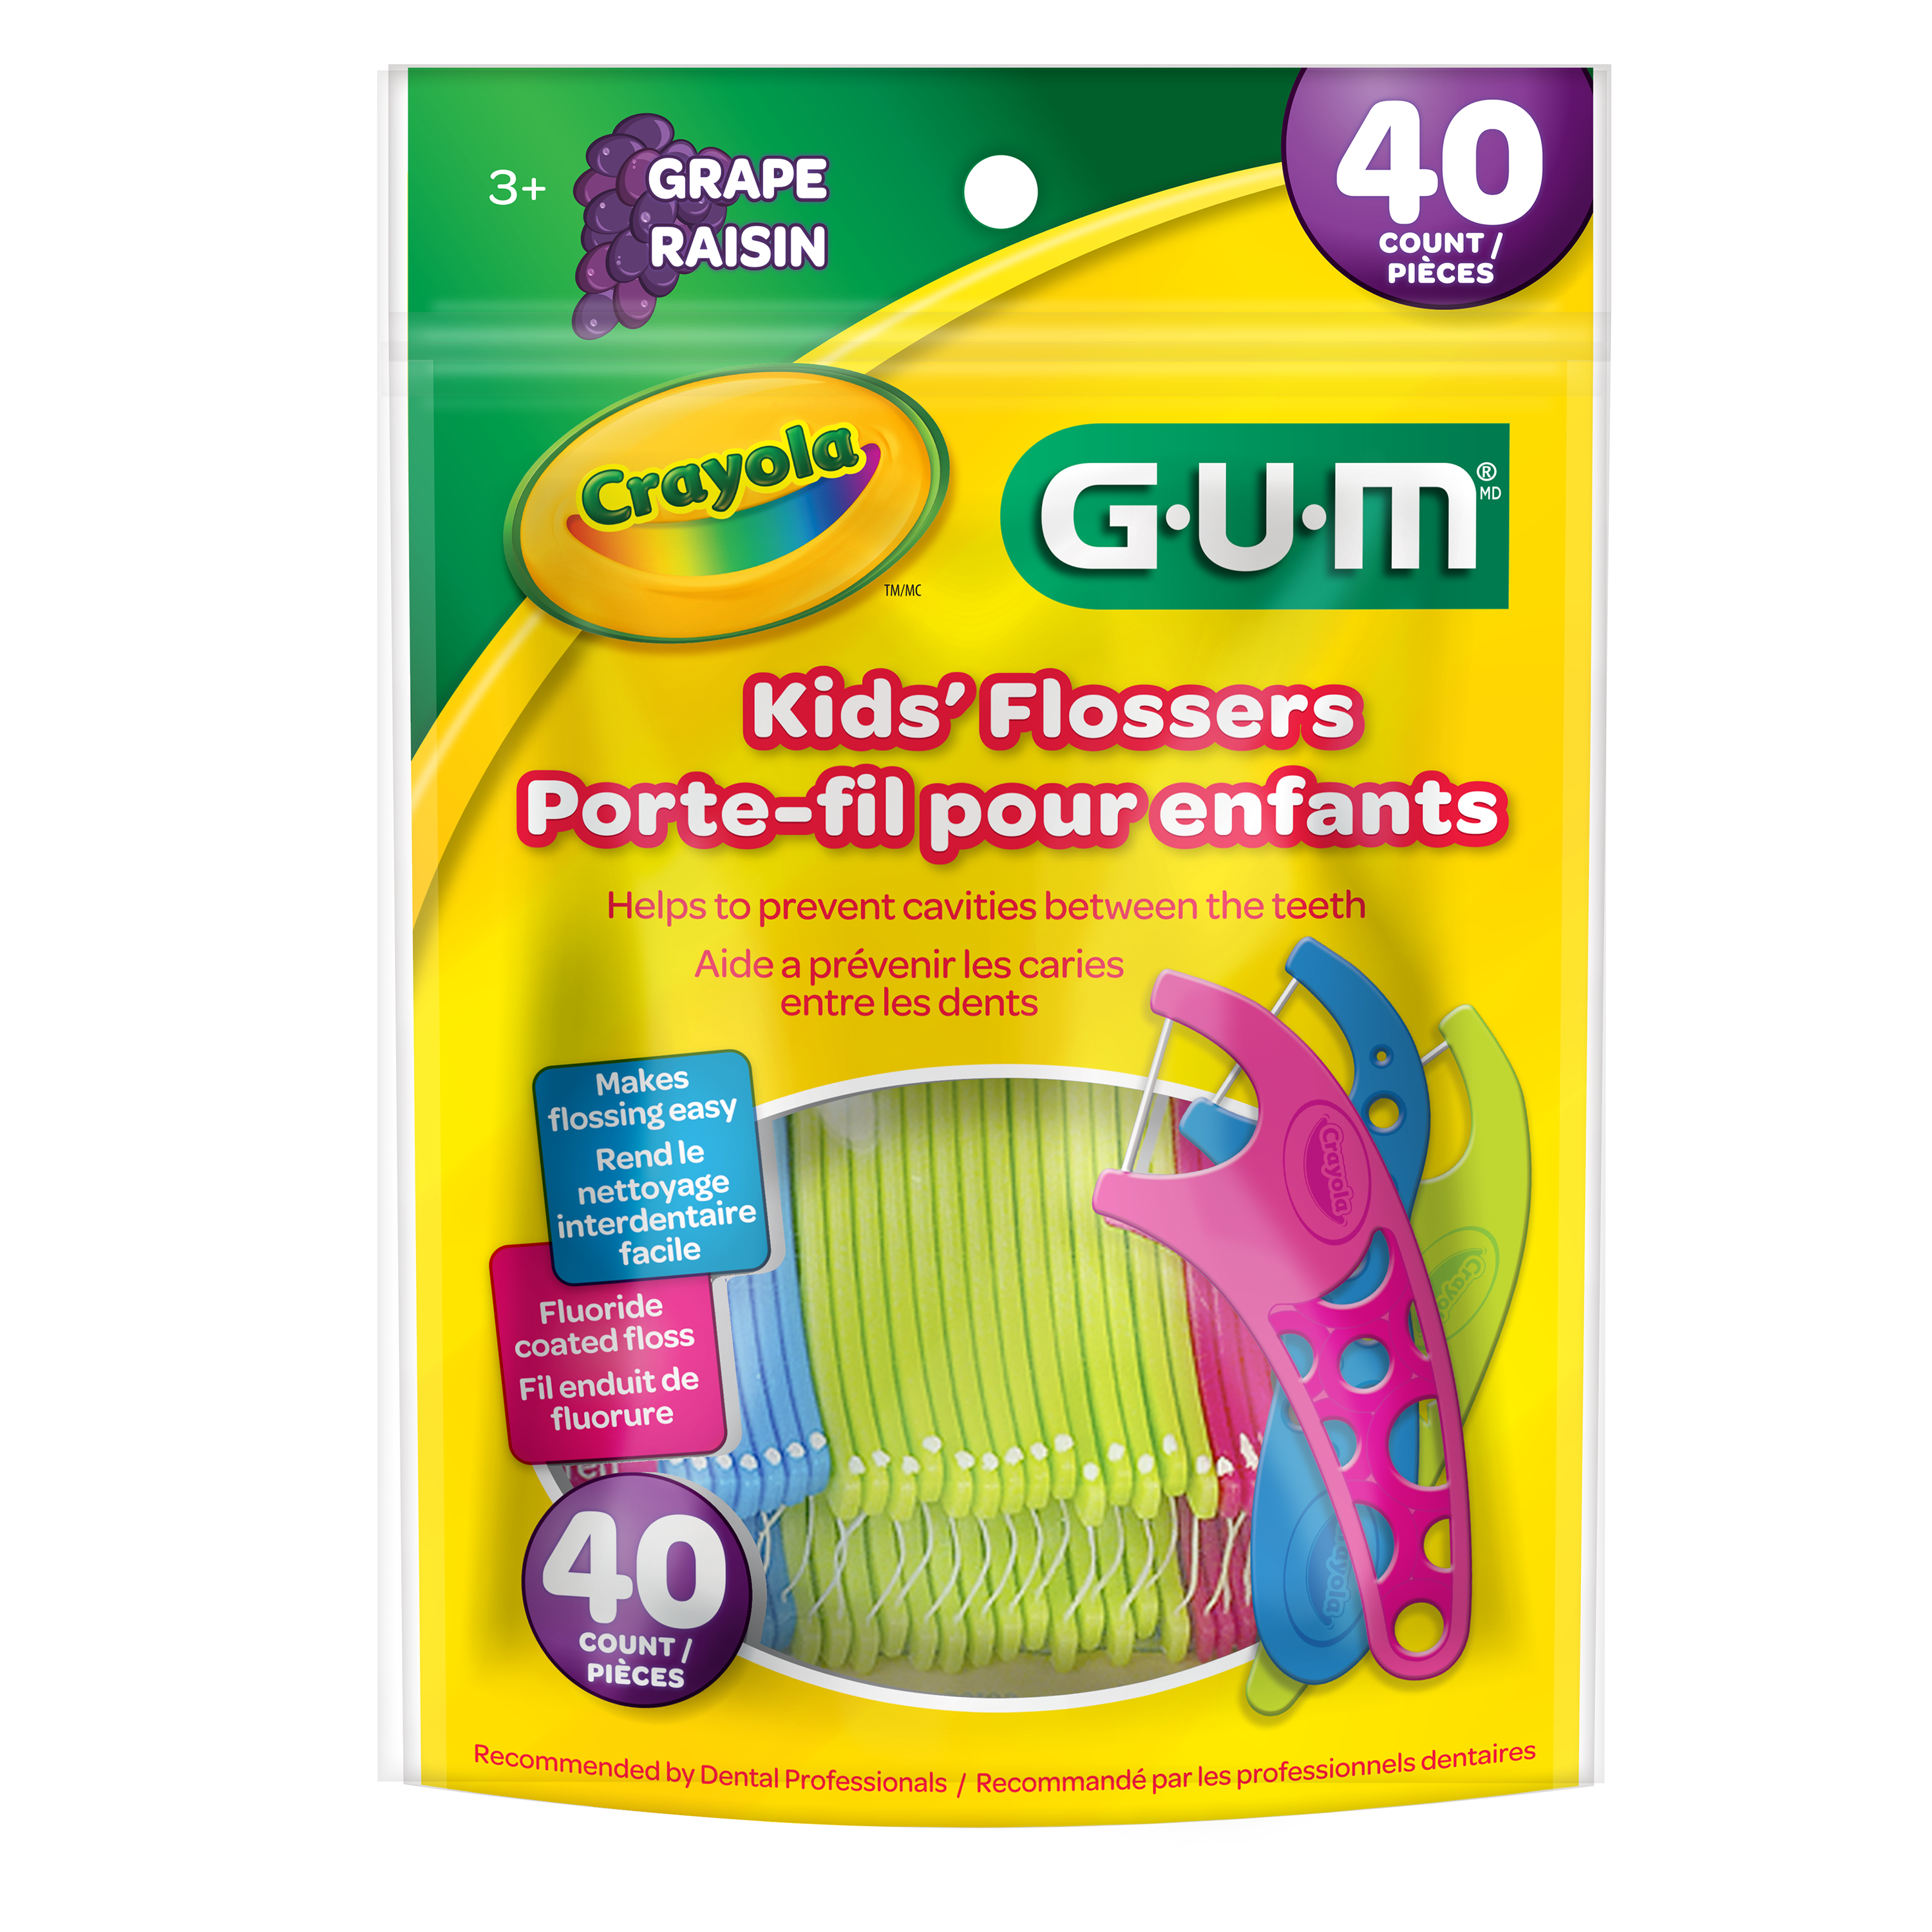 896RC-Product-Packaging-Flossers-Crayola-front-40ct.png